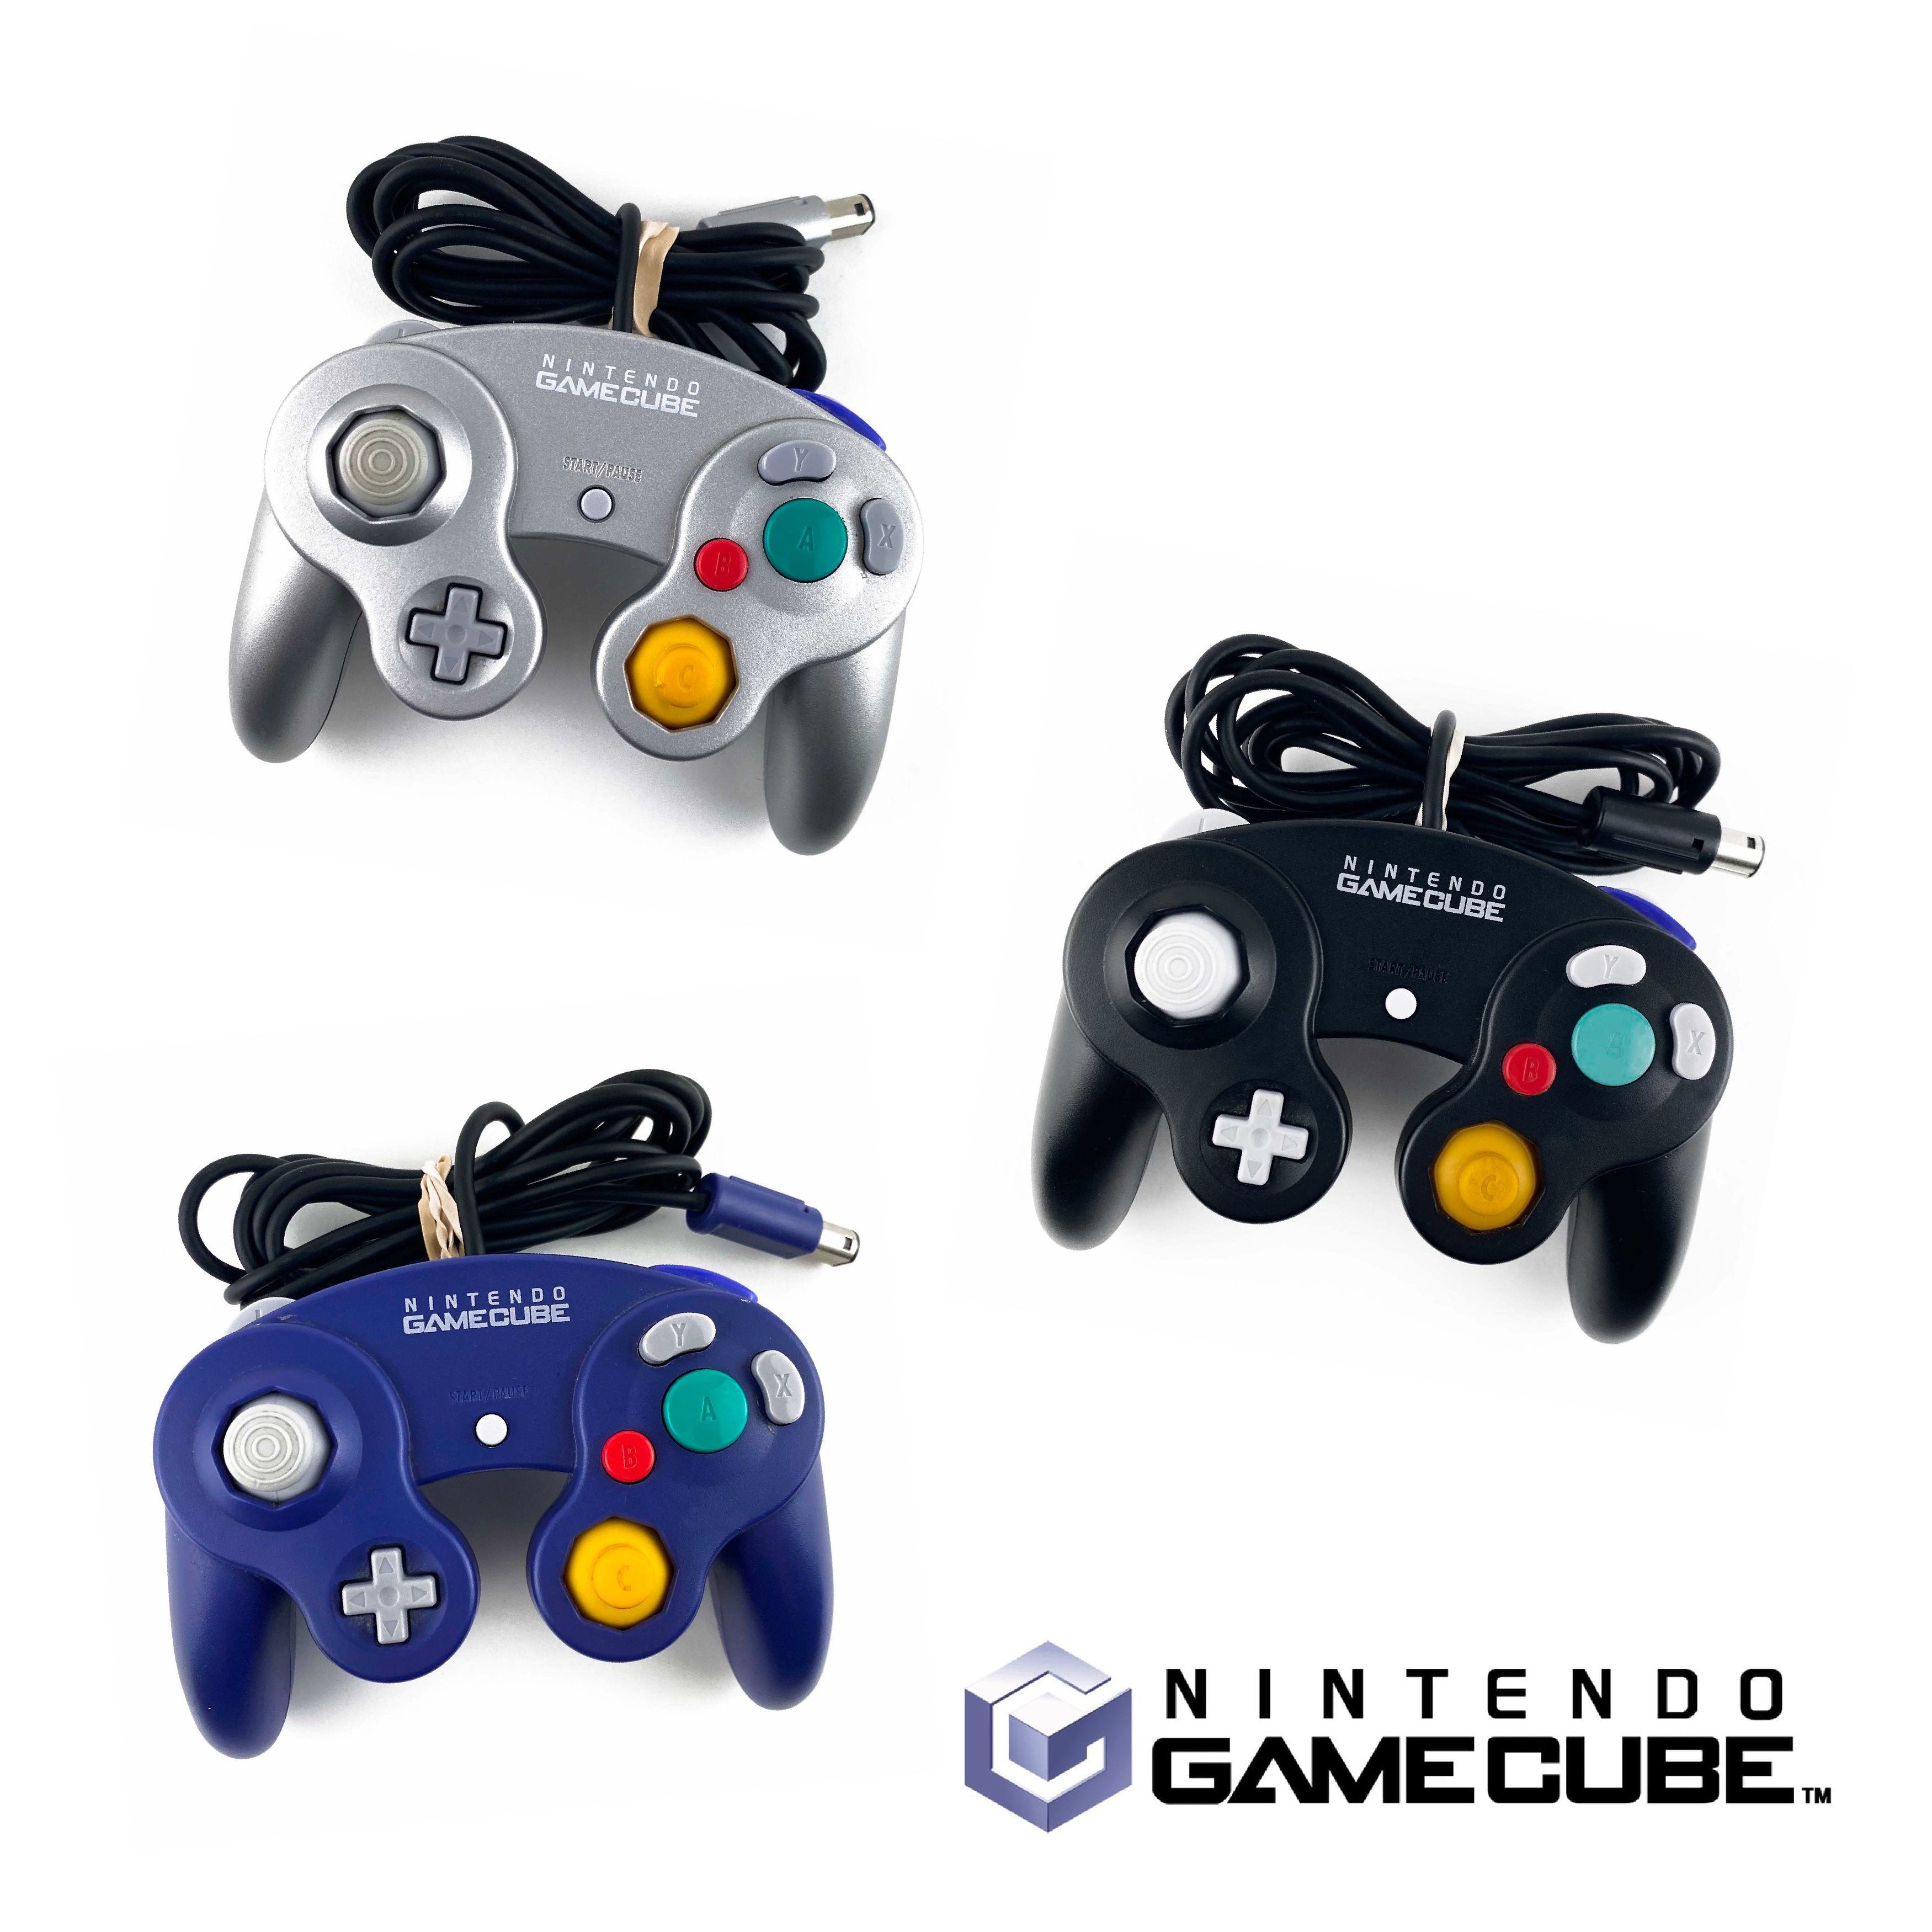 Nintendo GameCube Accessories | The Video Game Company